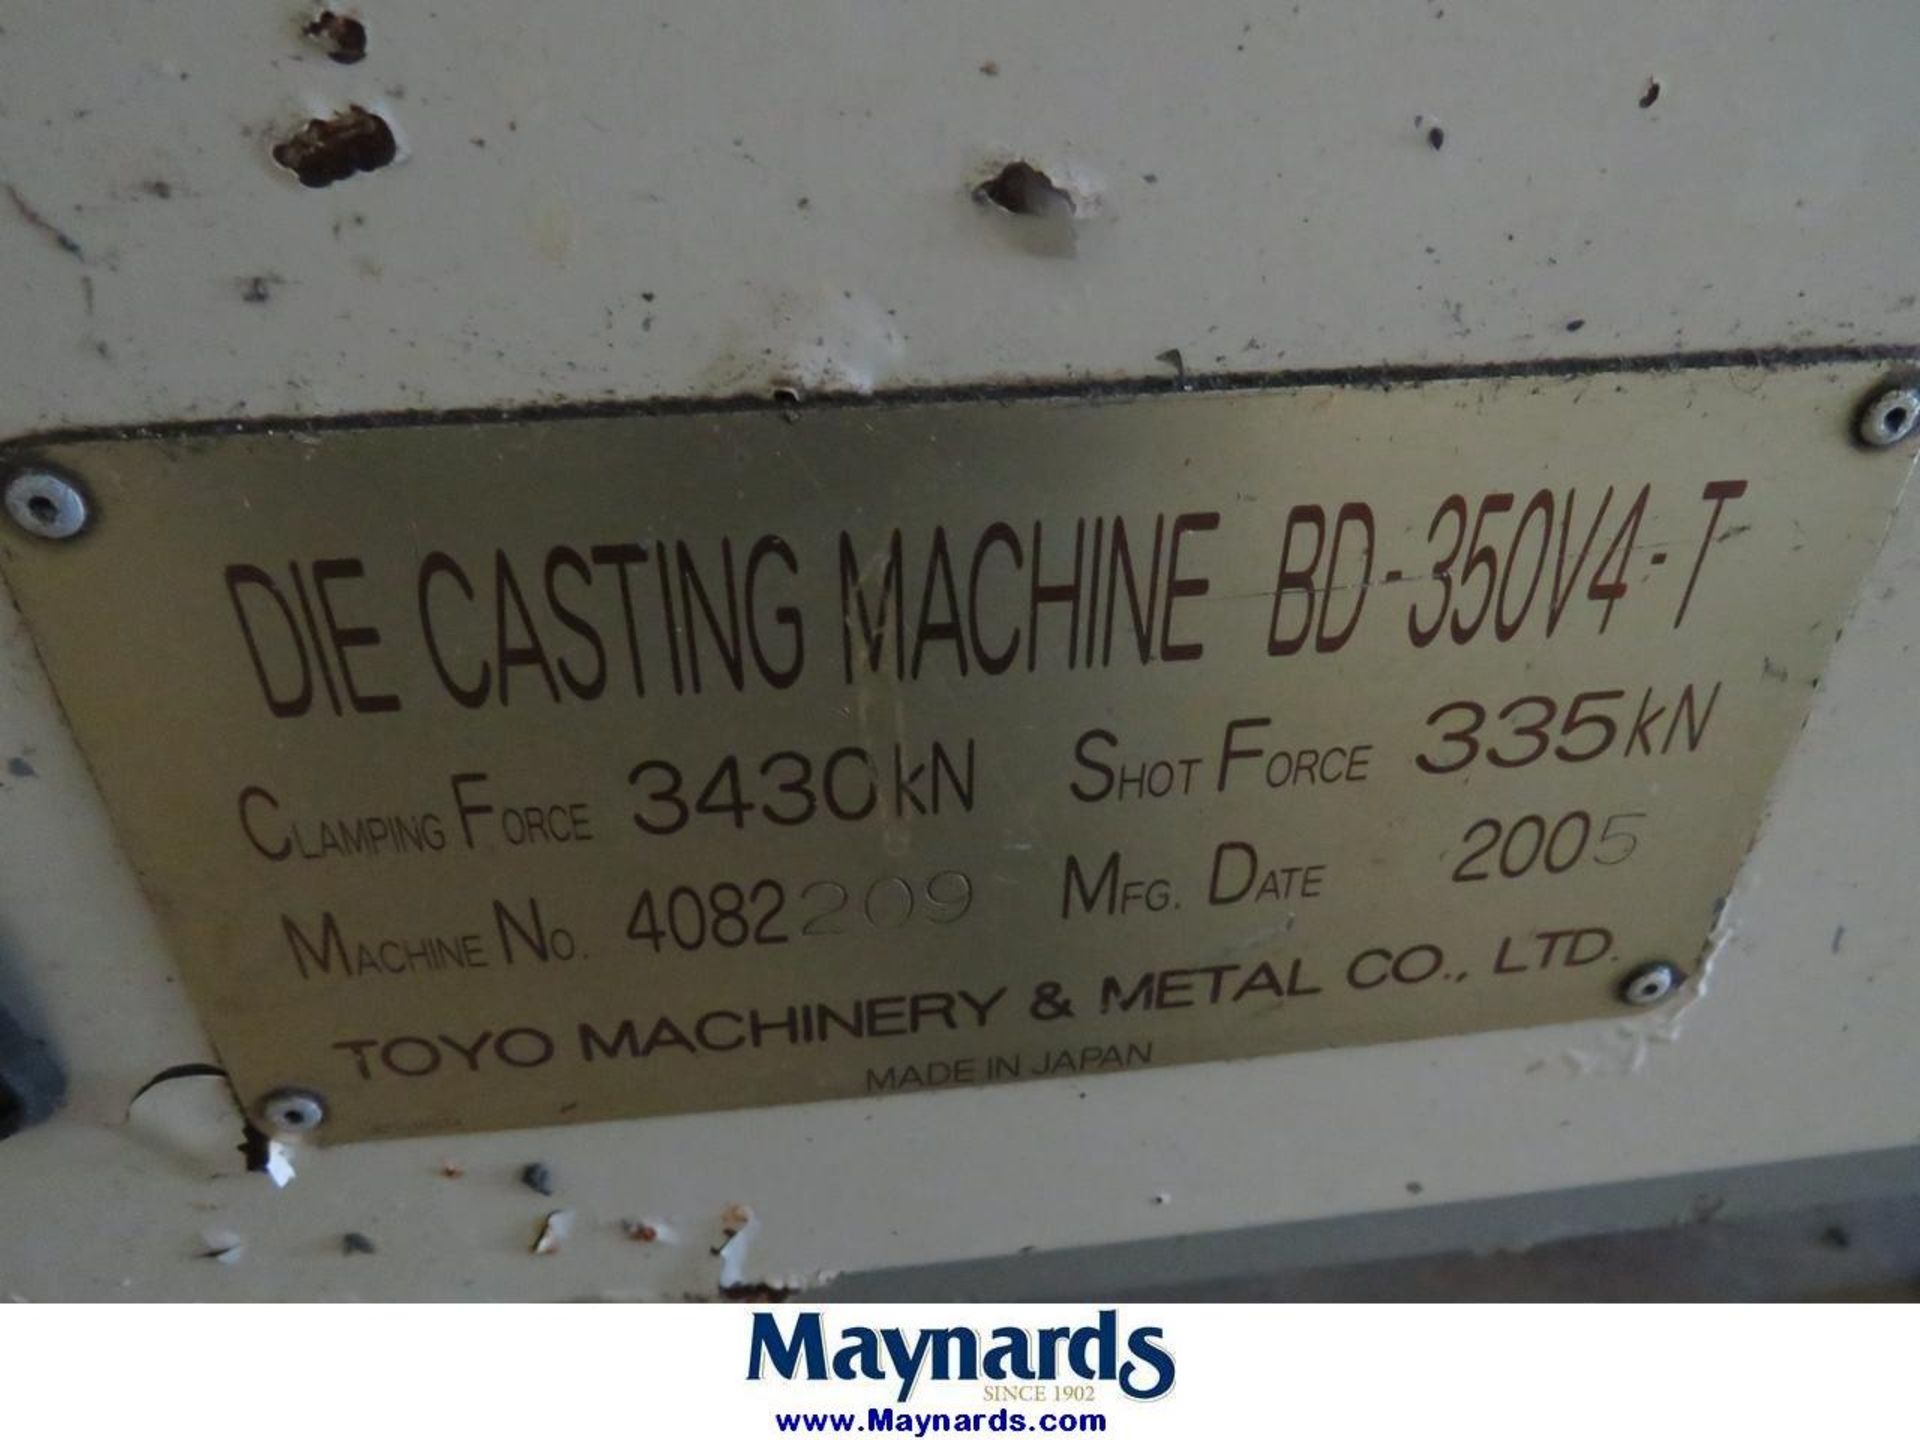 2005 Toyo BD-350V4-T 350 Ton Horizontal Cold Chamber Die Cast Press - Image 4 of 6